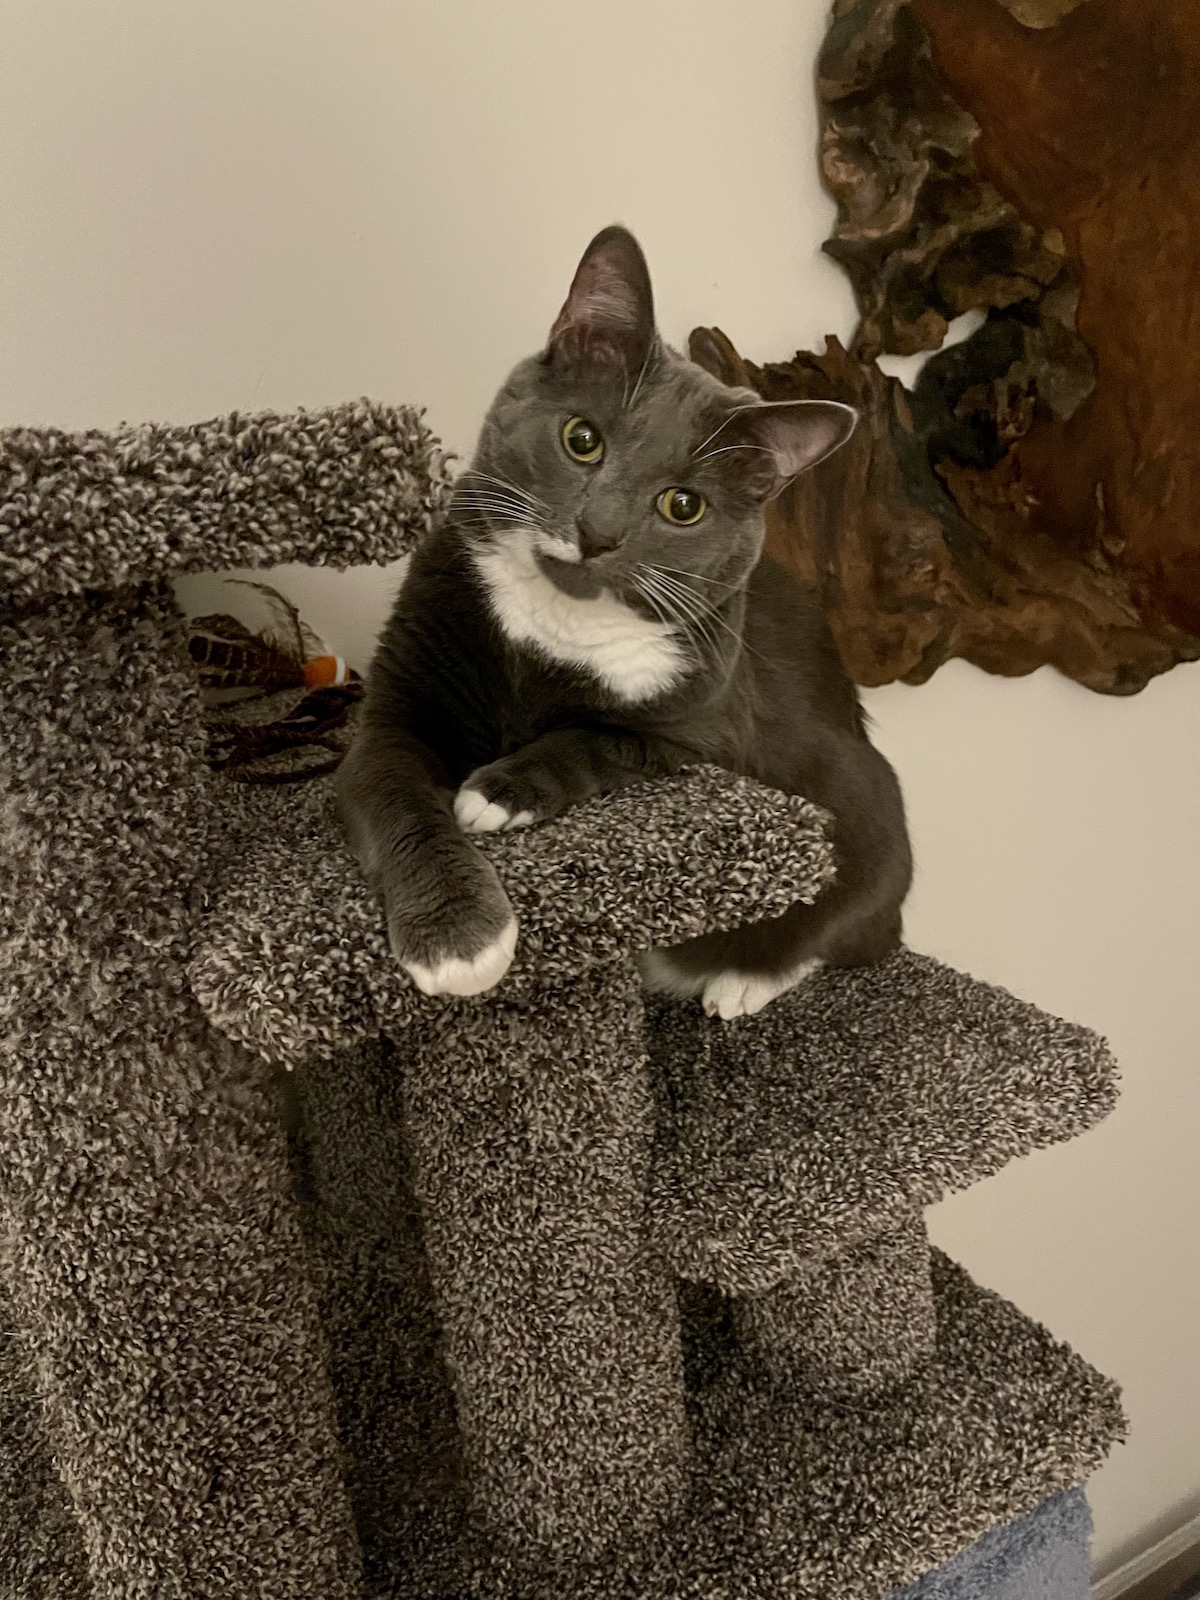 https://www.askamanager.org/wp-content/uploads/2022/06/Wallace-on-cat-tree.jpeg